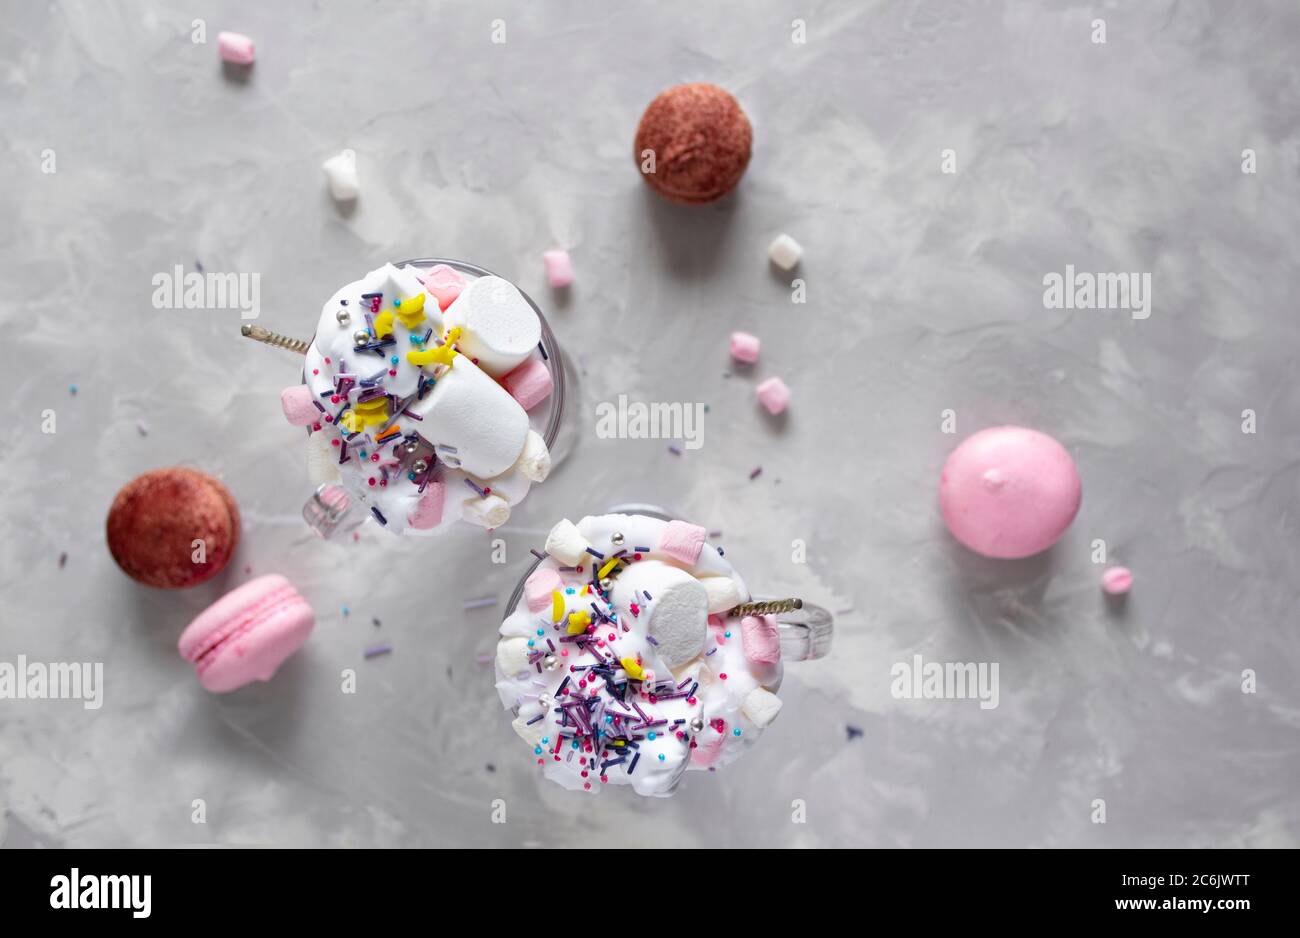 Pink hot chocolate with whipped cream and marshmallow candy in a 2 glass mugs, sweet pastel french macaroons on the grey background. Top view Stock Photo